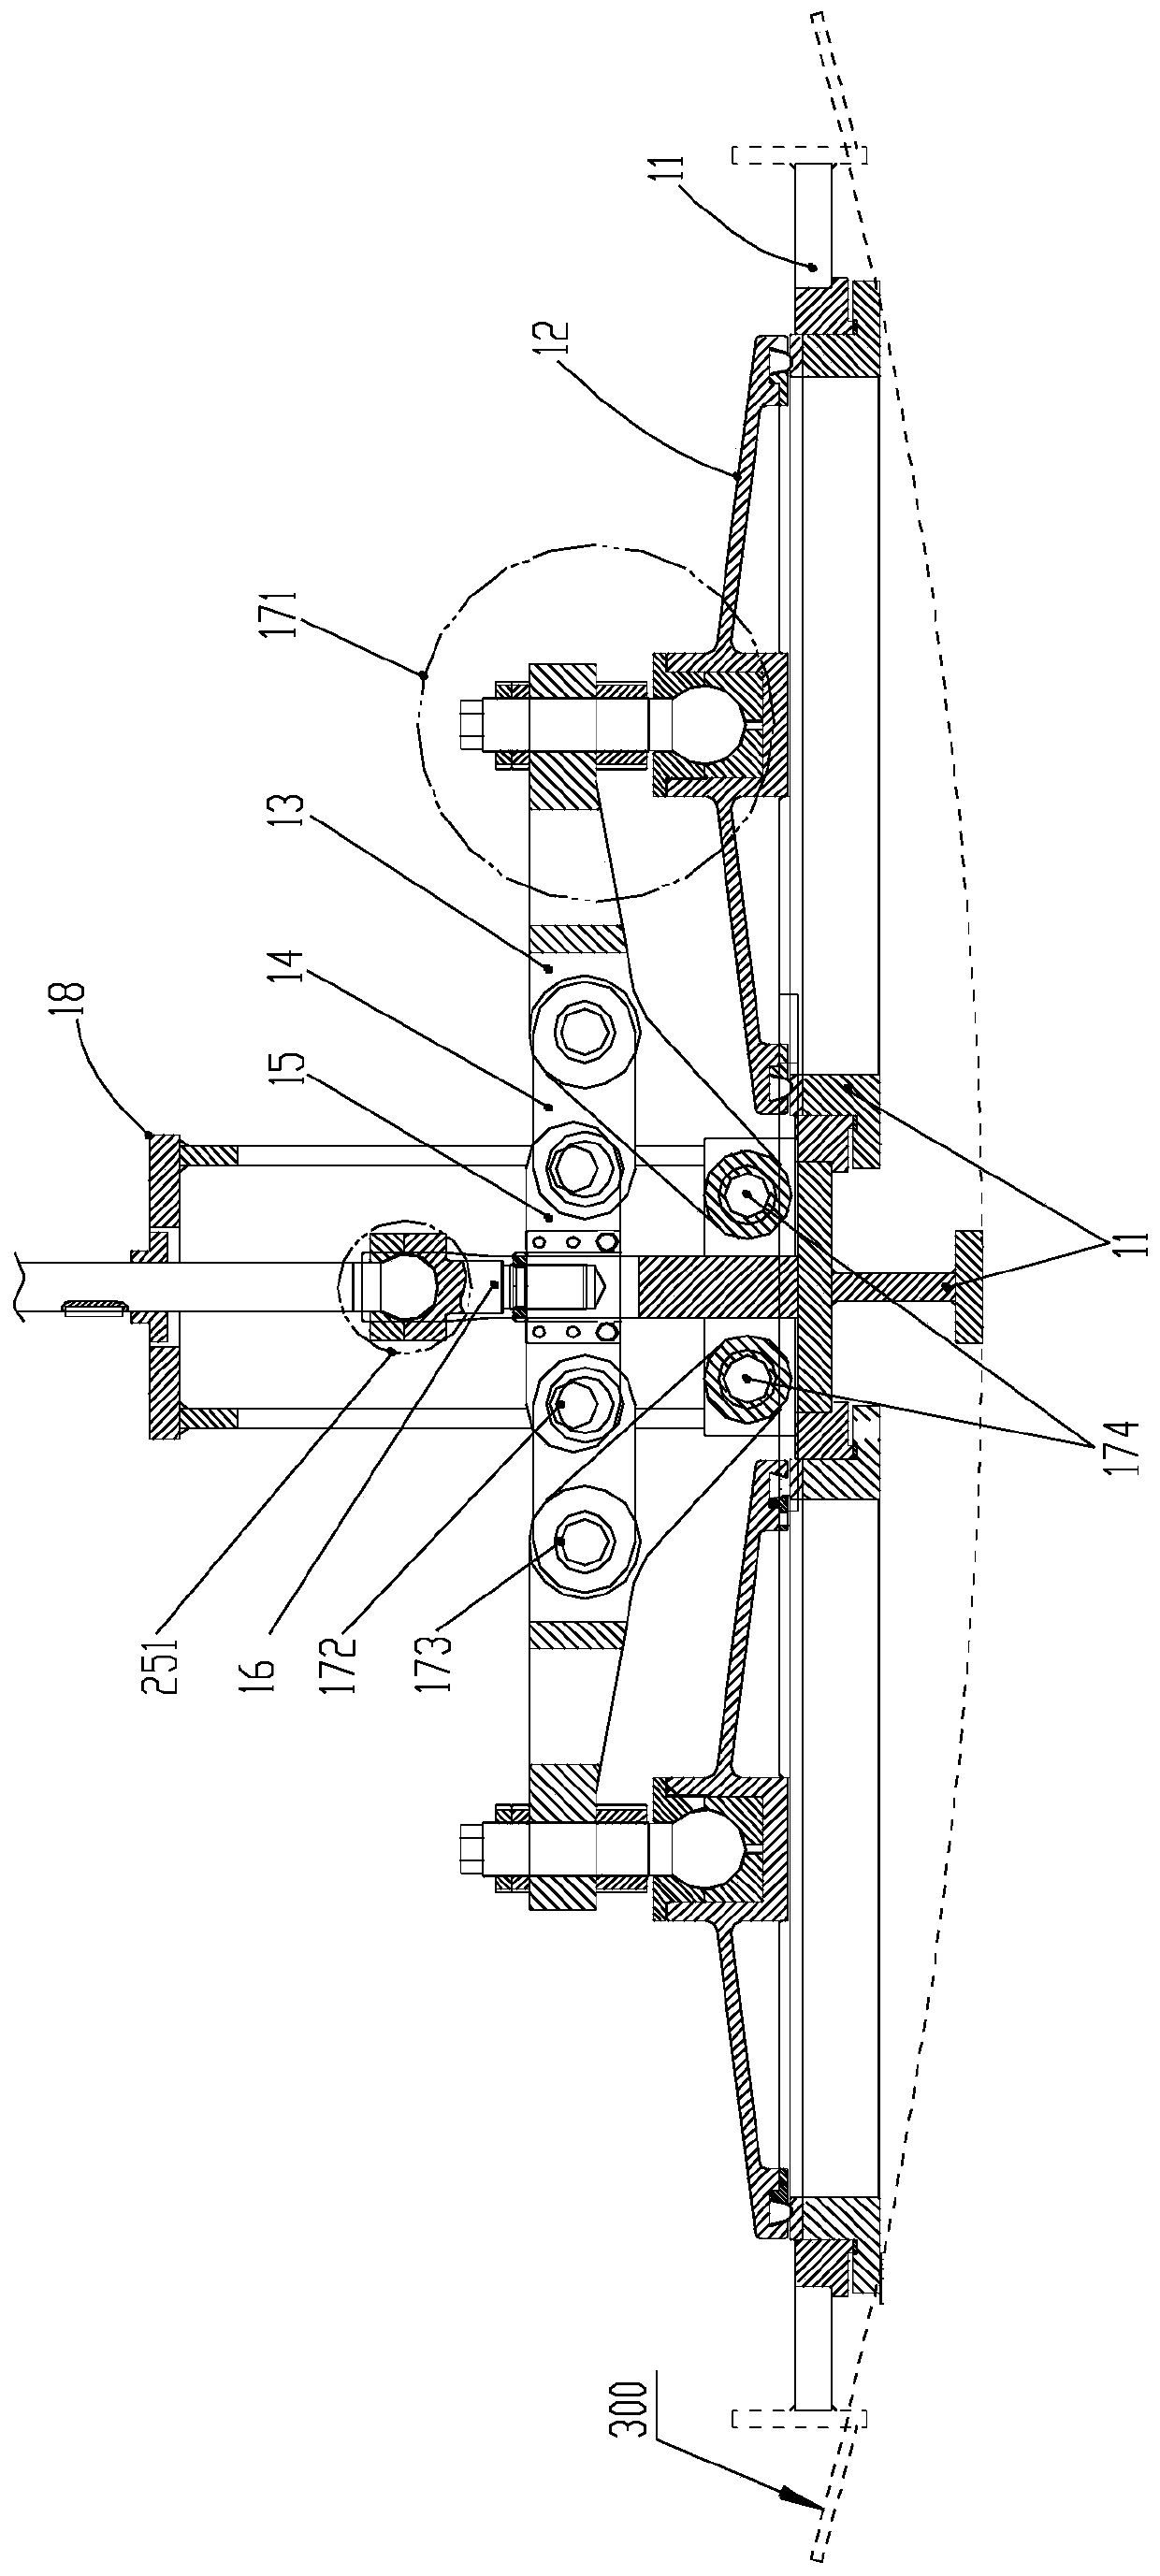 A system including a sea valve and its transmission device